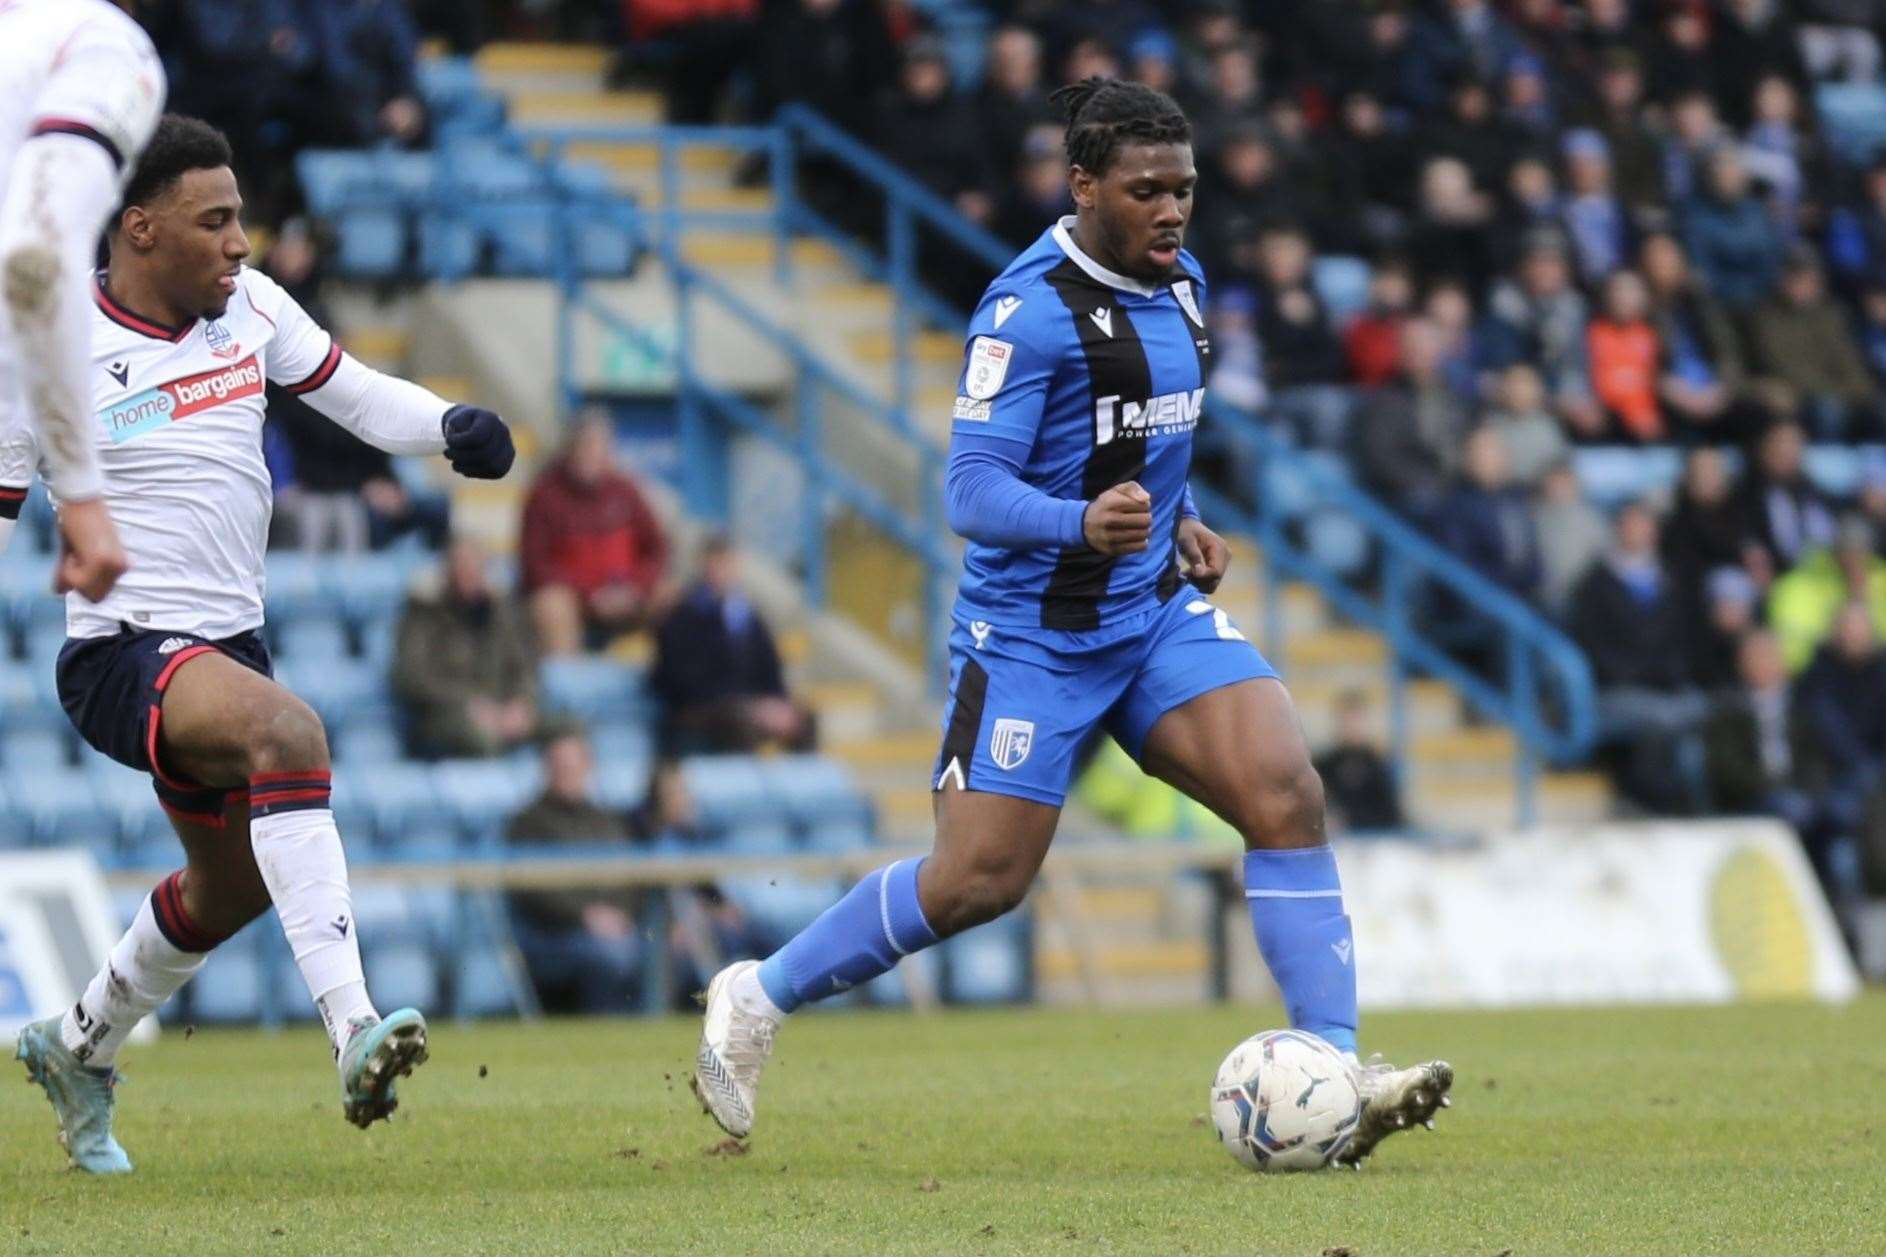 Dan Phillips in action for the Gills before his dismissal Picture: KPI